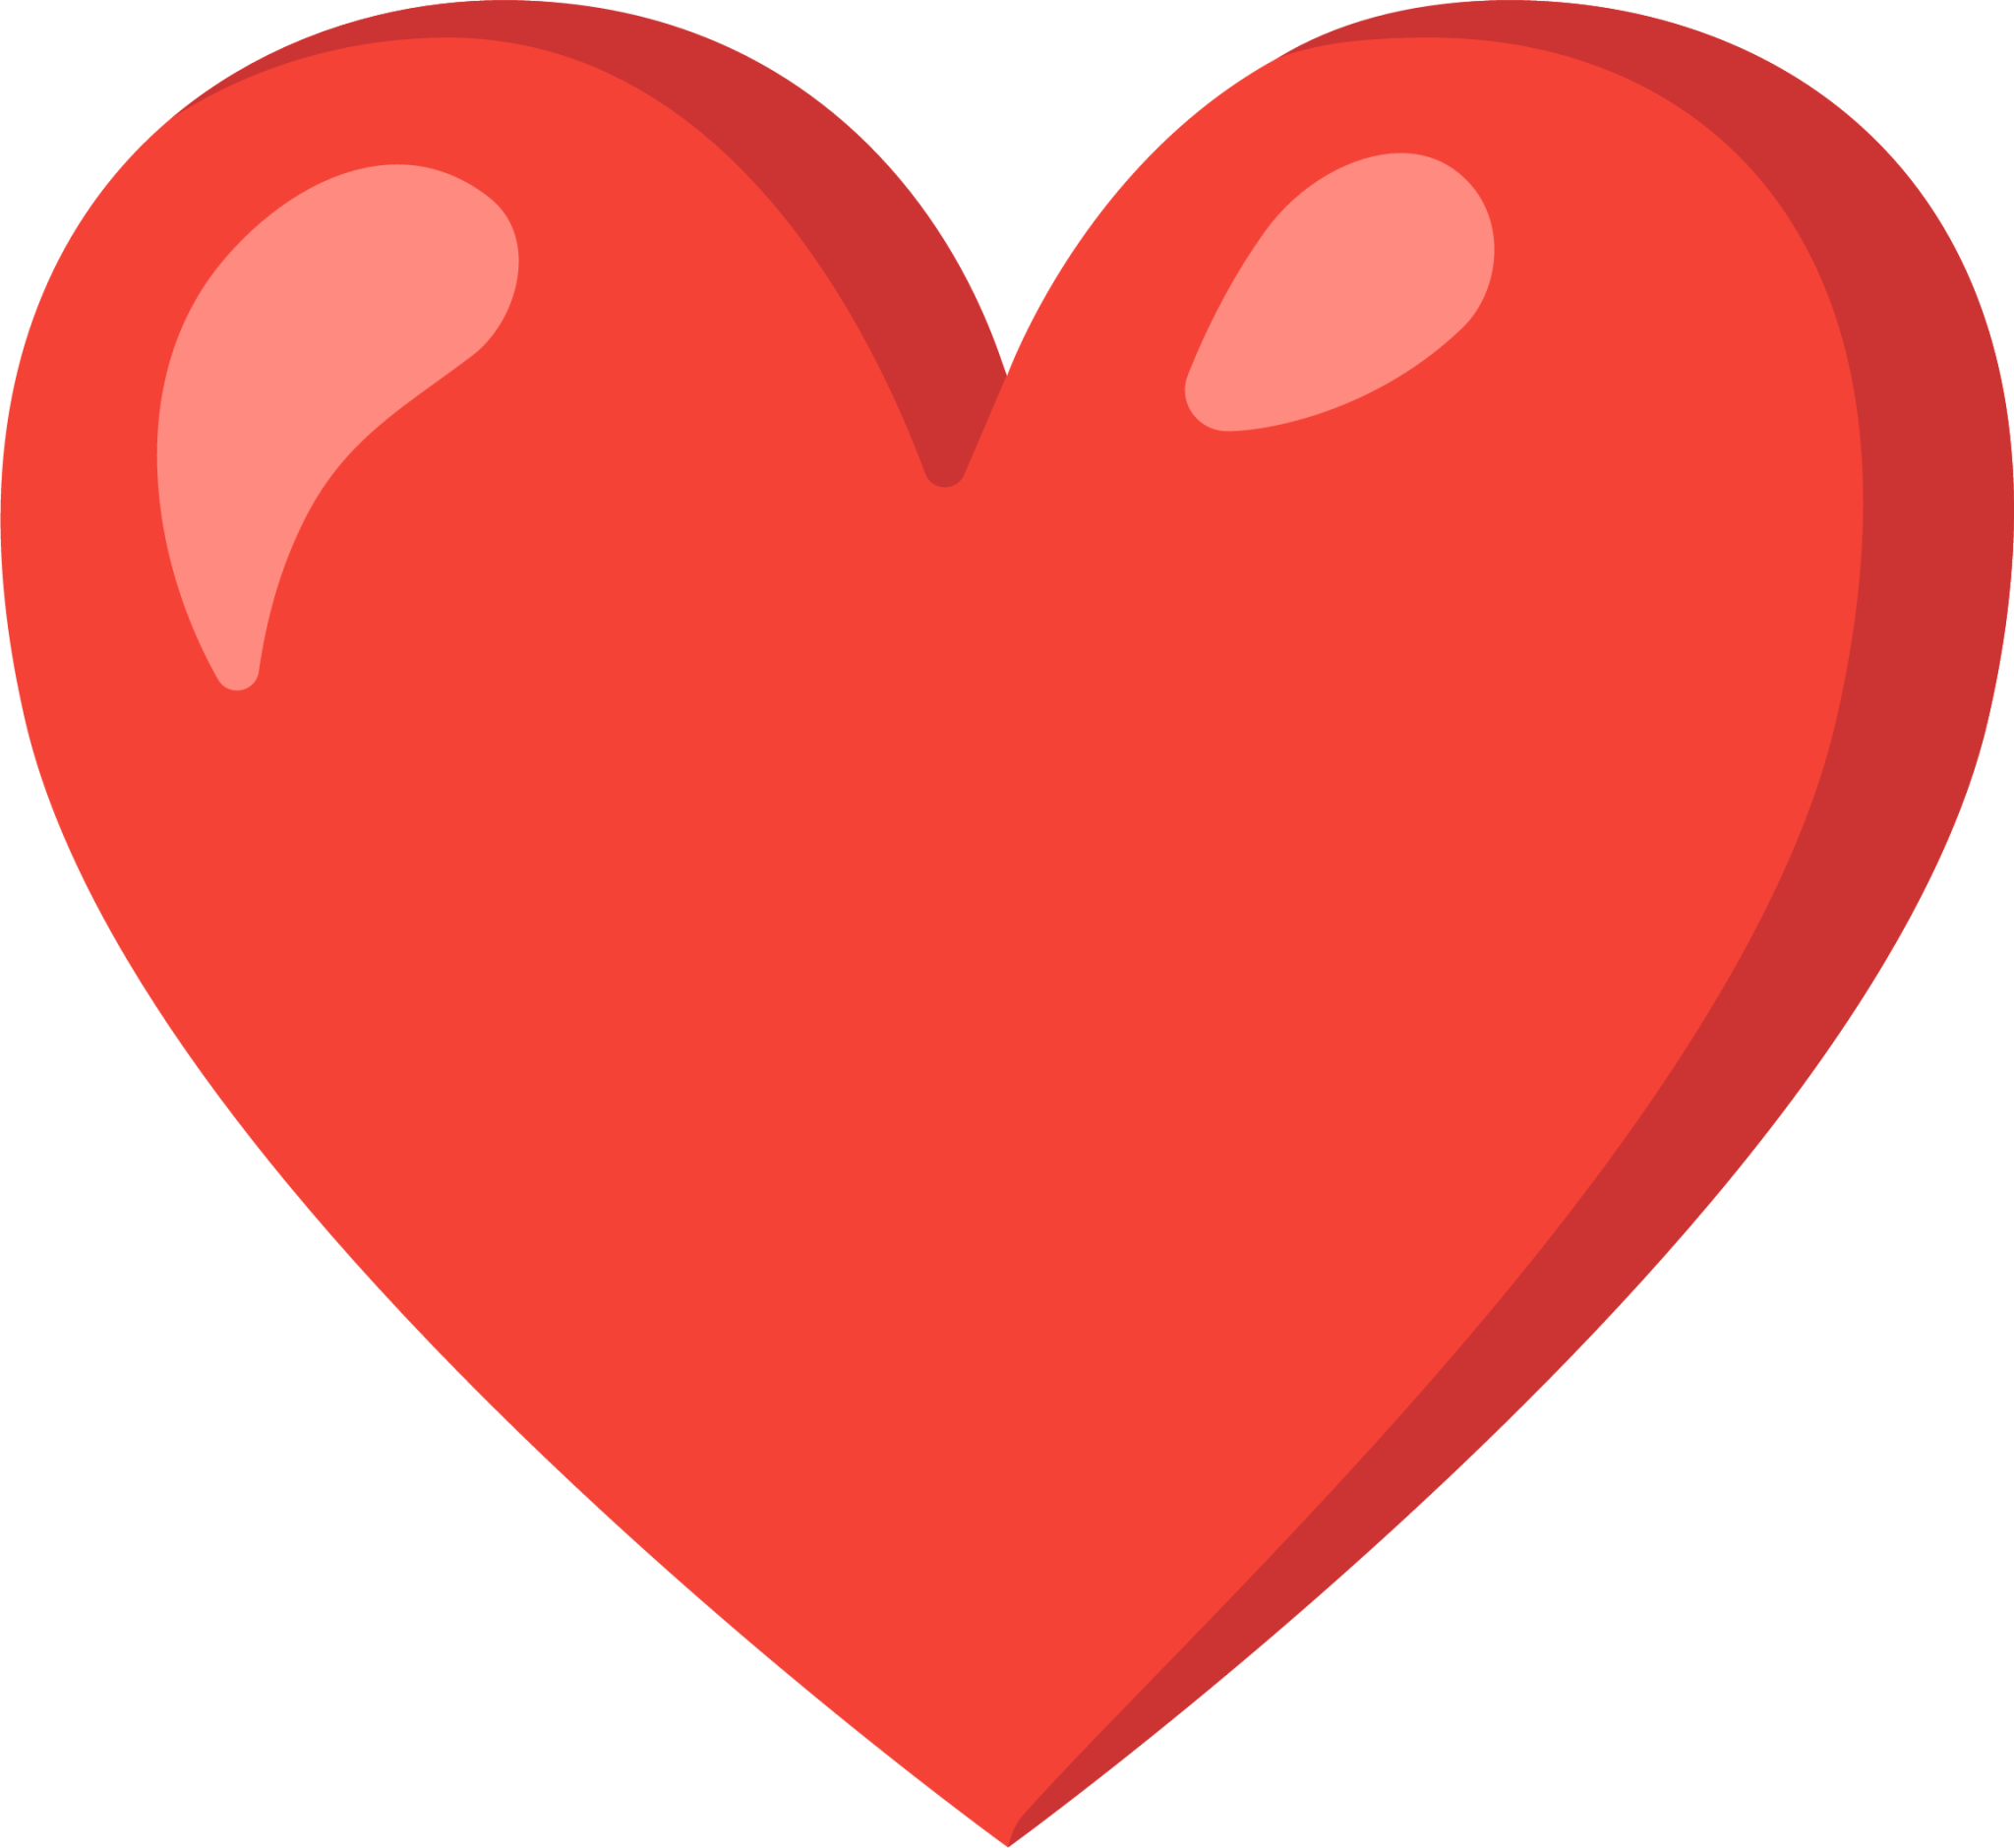 Red Heart Emoji Download For Free Iconduck